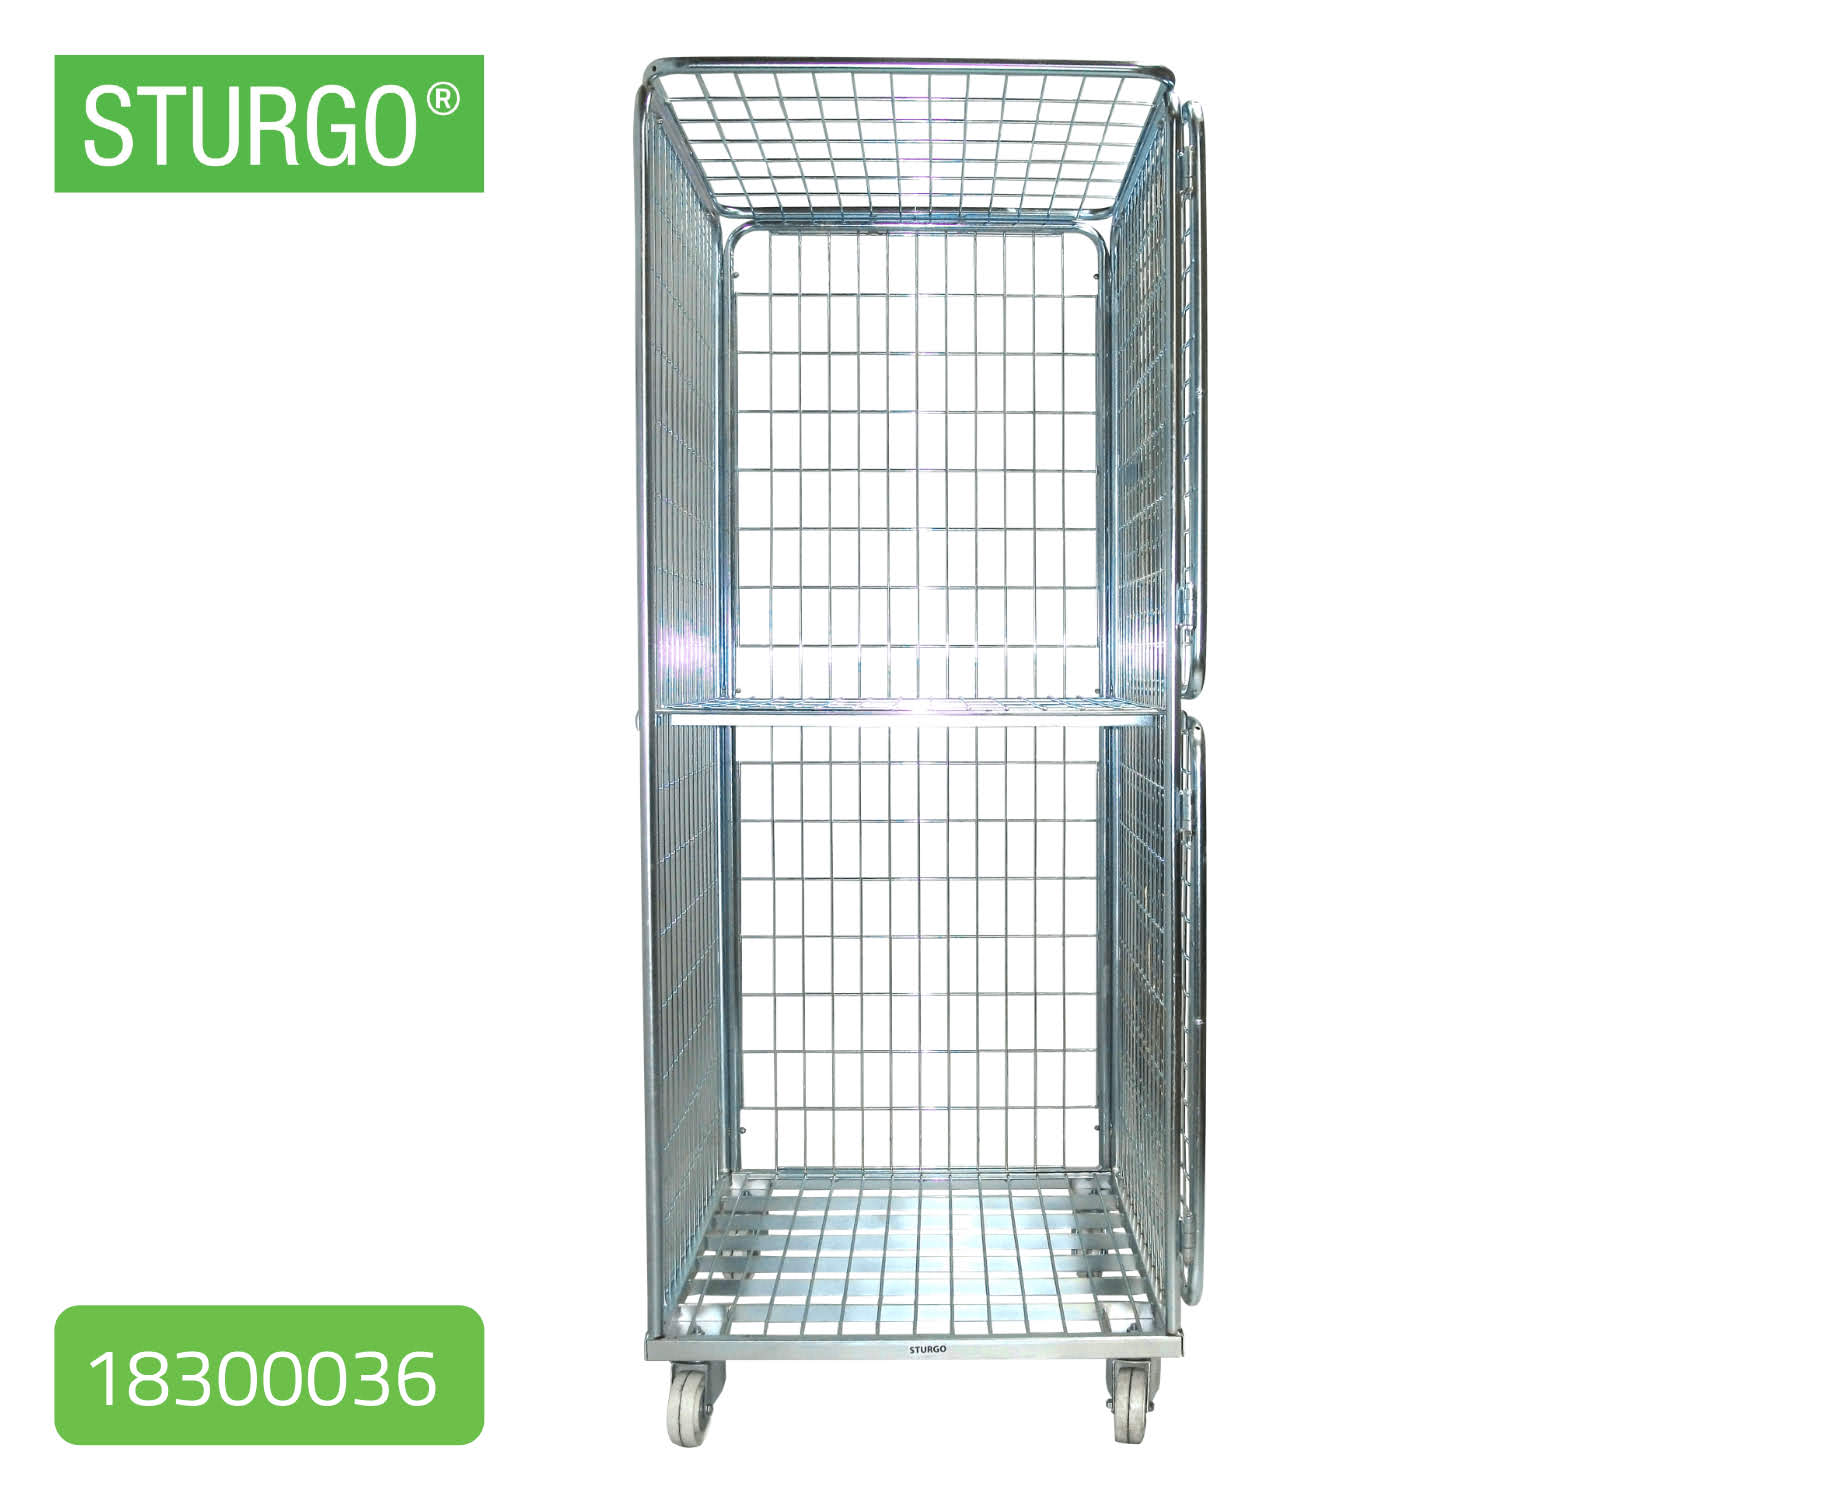 STURGO® Security Single Roll Cage Trolley